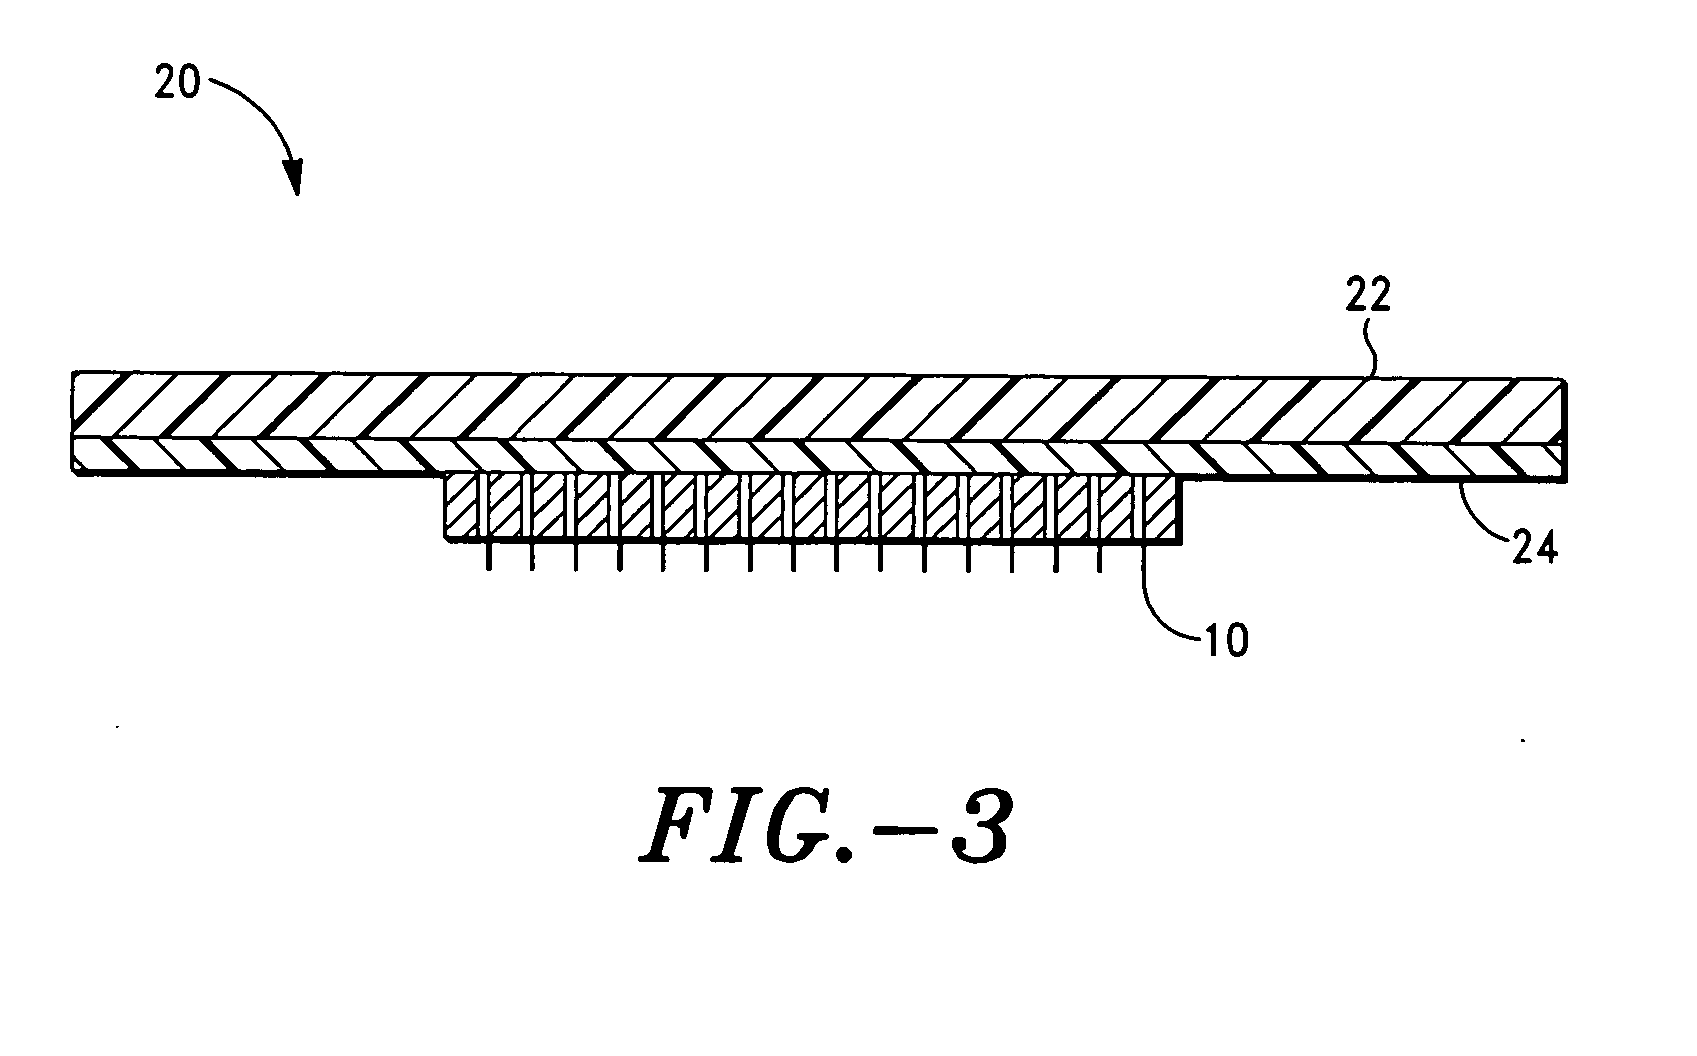 Microprojection array immunization patch and method